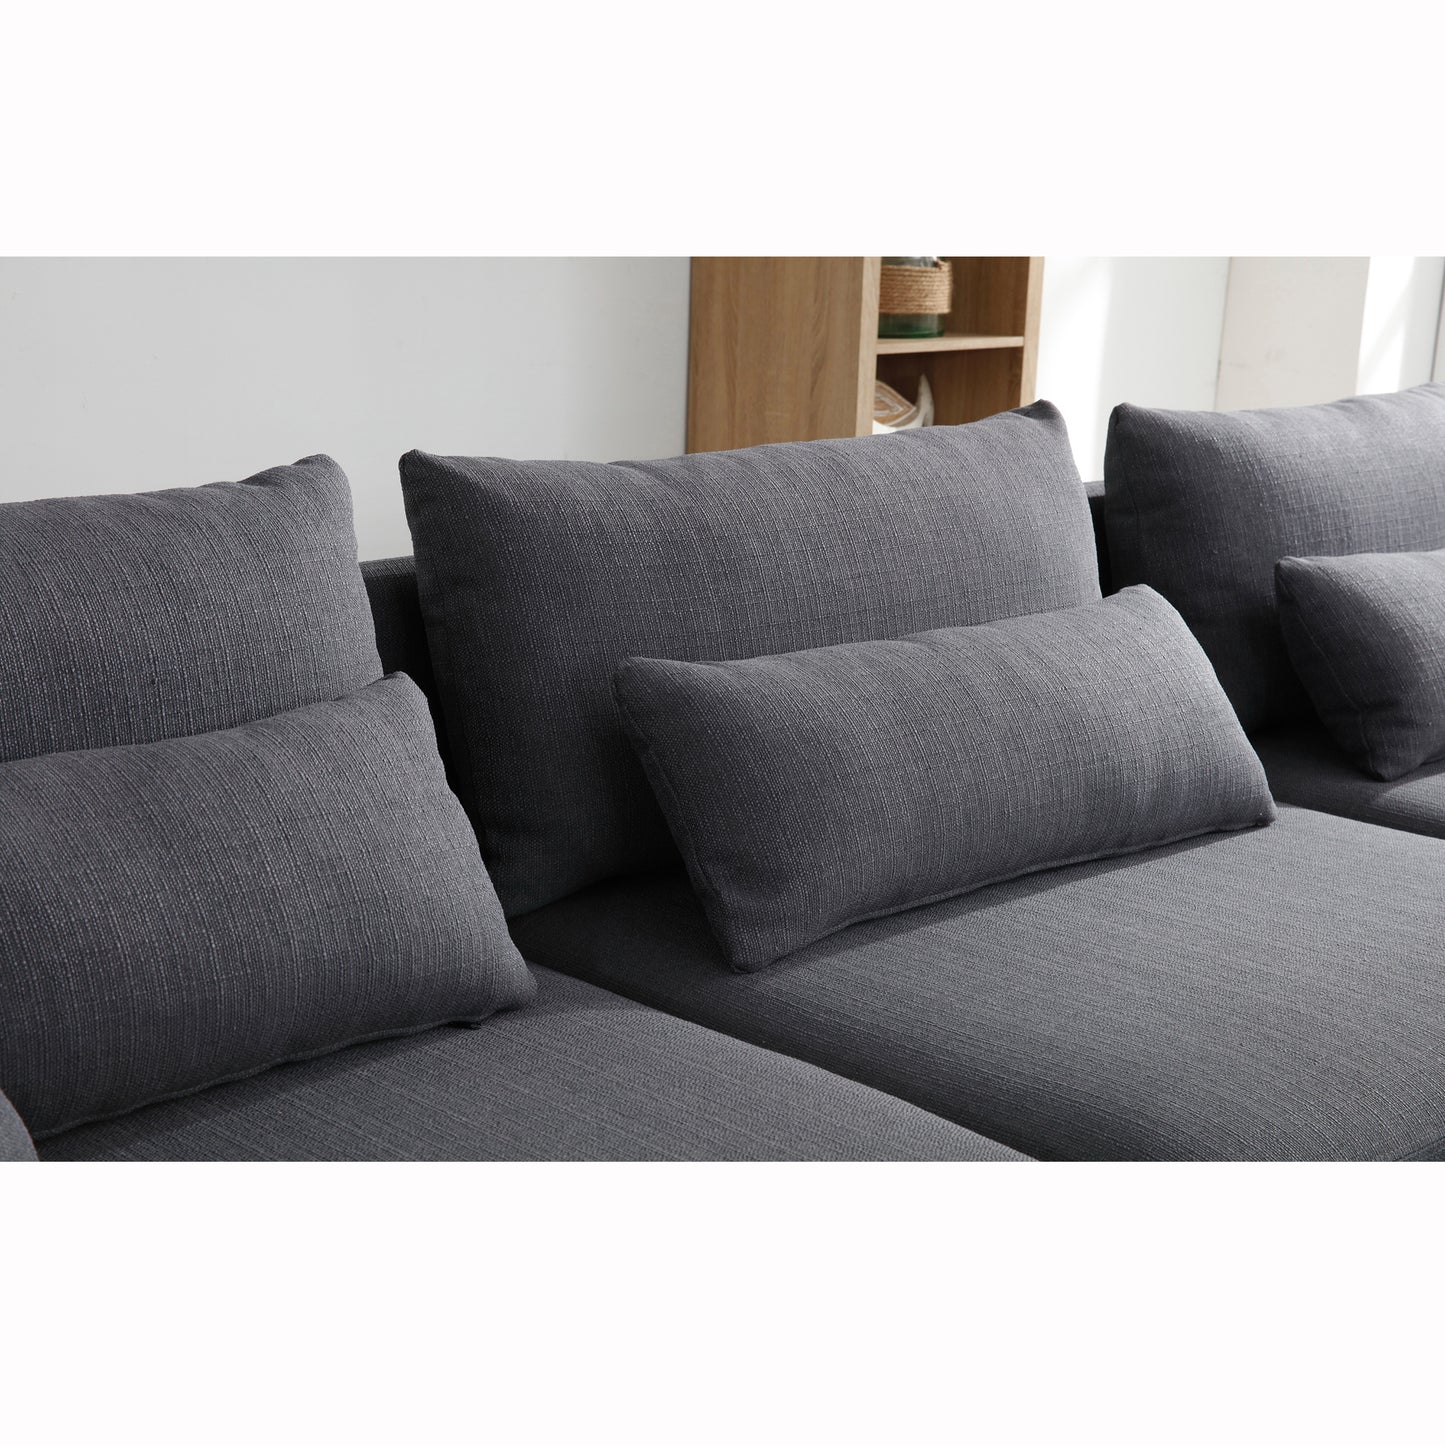 Gray Modern Convertible L-Shape Convertible Sectional Chaise Sofa with Removable Cushions and Wood Legs